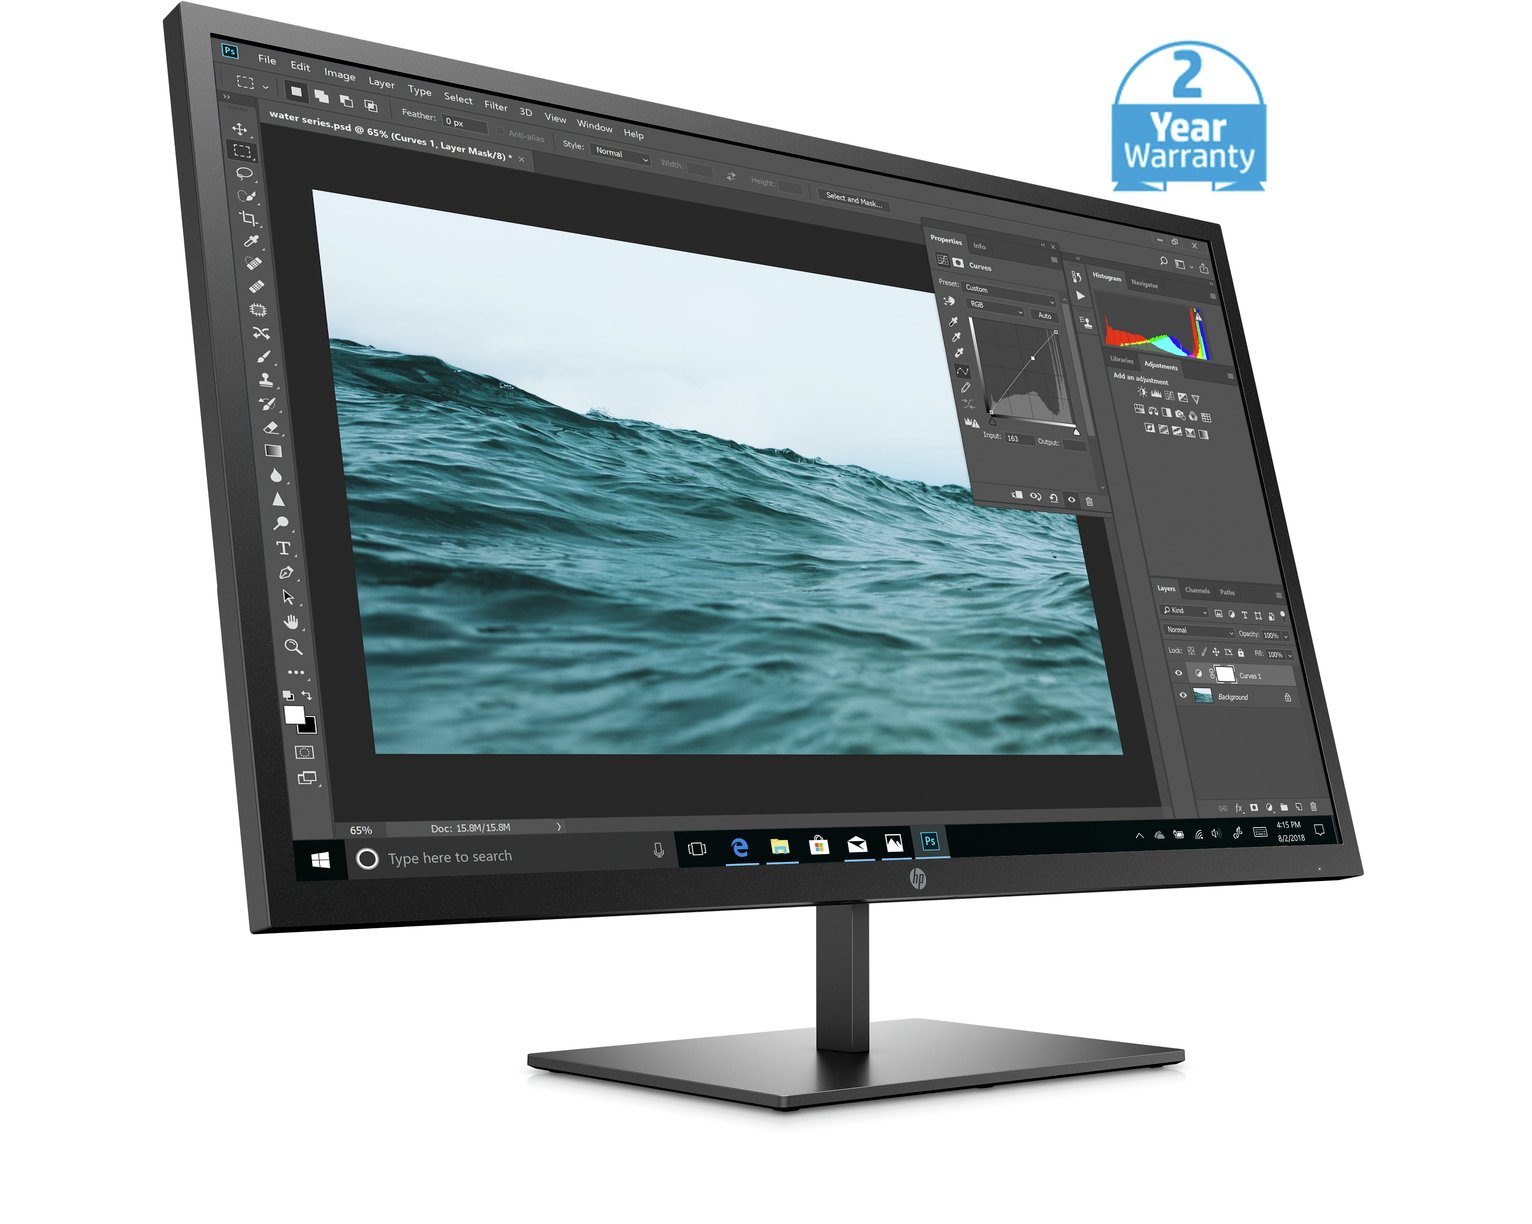 HP Pavilion 32 Inch 60Hz QHD Monitor Review